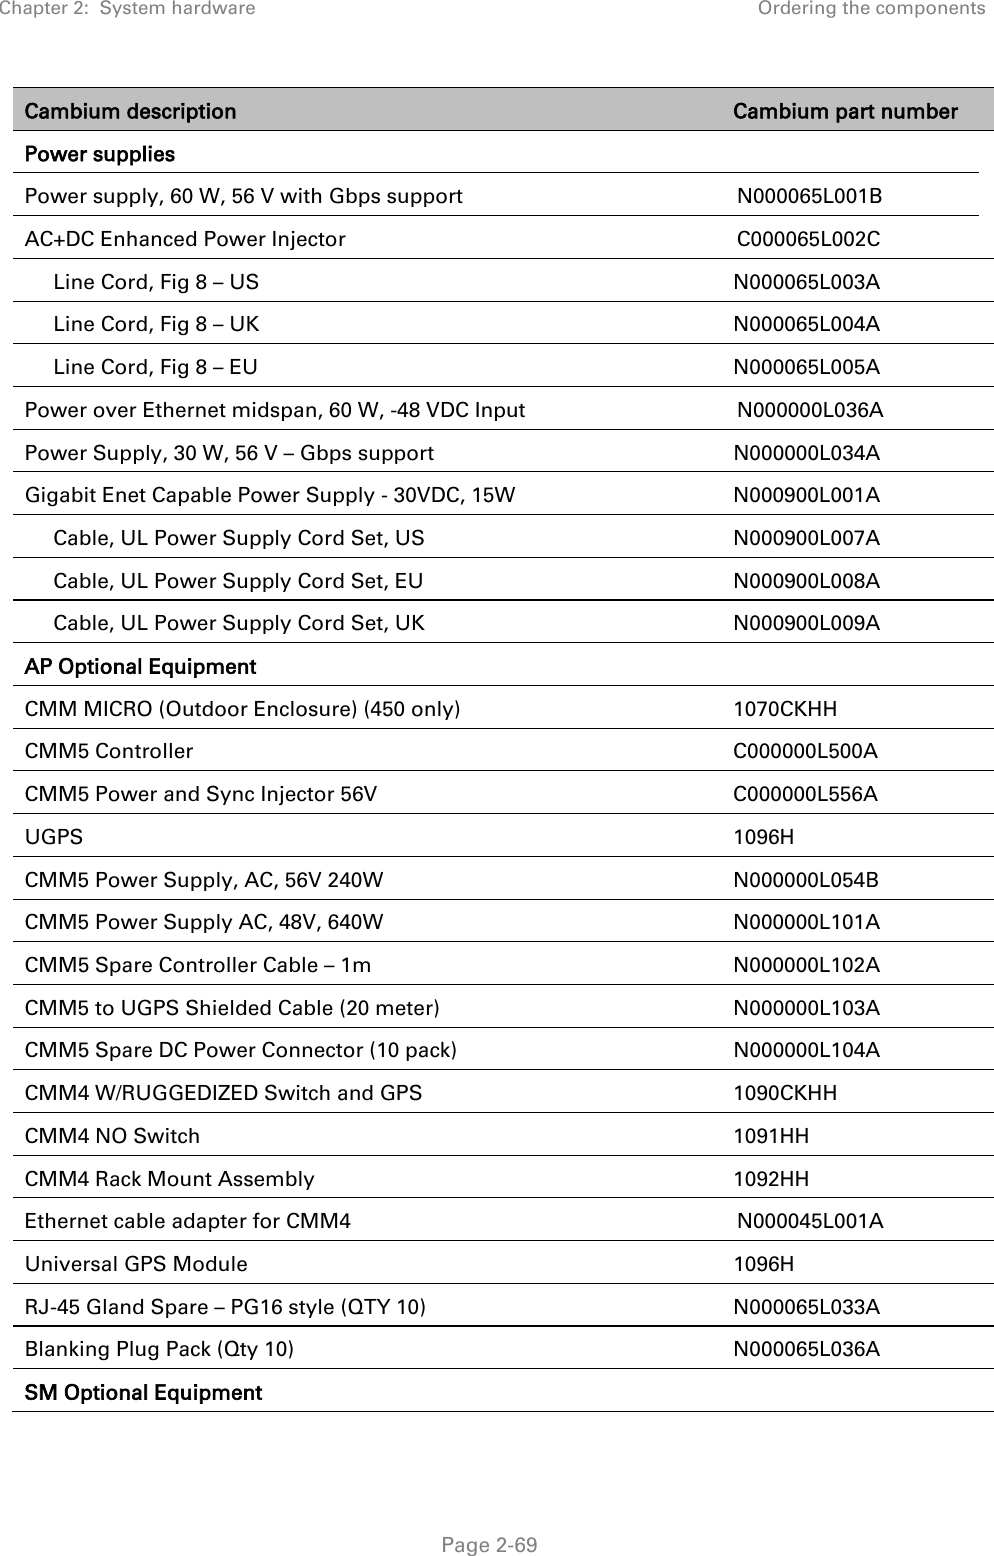 Chapter 2:  System hardware Ordering the components   Page 2-69 Cambium description Cambium part number Power supplies  Power supply, 60 W, 56 V with Gbps support N000065L001B AC+DC Enhanced Power Injector C000065L002C      Line Cord, Fig 8 – US  N000065L003A      Line Cord, Fig 8 – UK  N000065L004A      Line Cord, Fig 8 – EU  N000065L005A Power over Ethernet midspan, 60 W, -48 VDC Input N000000L036A Power Supply, 30 W, 56 V – Gbps support N000000L034A Gigabit Enet Capable Power Supply - 30VDC, 15W N000900L001A      Cable, UL Power Supply Cord Set, US N000900L007A      Cable, UL Power Supply Cord Set, EU N000900L008A      Cable, UL Power Supply Cord Set, UK N000900L009A AP Optional Equipment  CMM MICRO (Outdoor Enclosure) (450 only) 1070CKHH CMM5 Controller C000000L500A CMM5 Power and Sync Injector 56V C000000L556A UGPS  1096H CMM5 Power Supply, AC, 56V 240W N000000L054B CMM5 Power Supply AC, 48V, 640W N000000L101A CMM5 Spare Controller Cable – 1m N000000L102A CMM5 to UGPS Shielded Cable (20 meter) N000000L103A CMM5 Spare DC Power Connector (10 pack) N000000L104A CMM4 W/RUGGEDIZED Switch and GPS 1090CKHH CMM4 NO Switch 1091HH CMM4 Rack Mount Assembly 1092HH Ethernet cable adapter for CMM4 N000045L001A Universal GPS Module  1096H RJ-45 Gland Spare – PG16 style (QTY 10) N000065L033A Blanking Plug Pack (Qty 10) N000065L036A SM Optional Equipment  